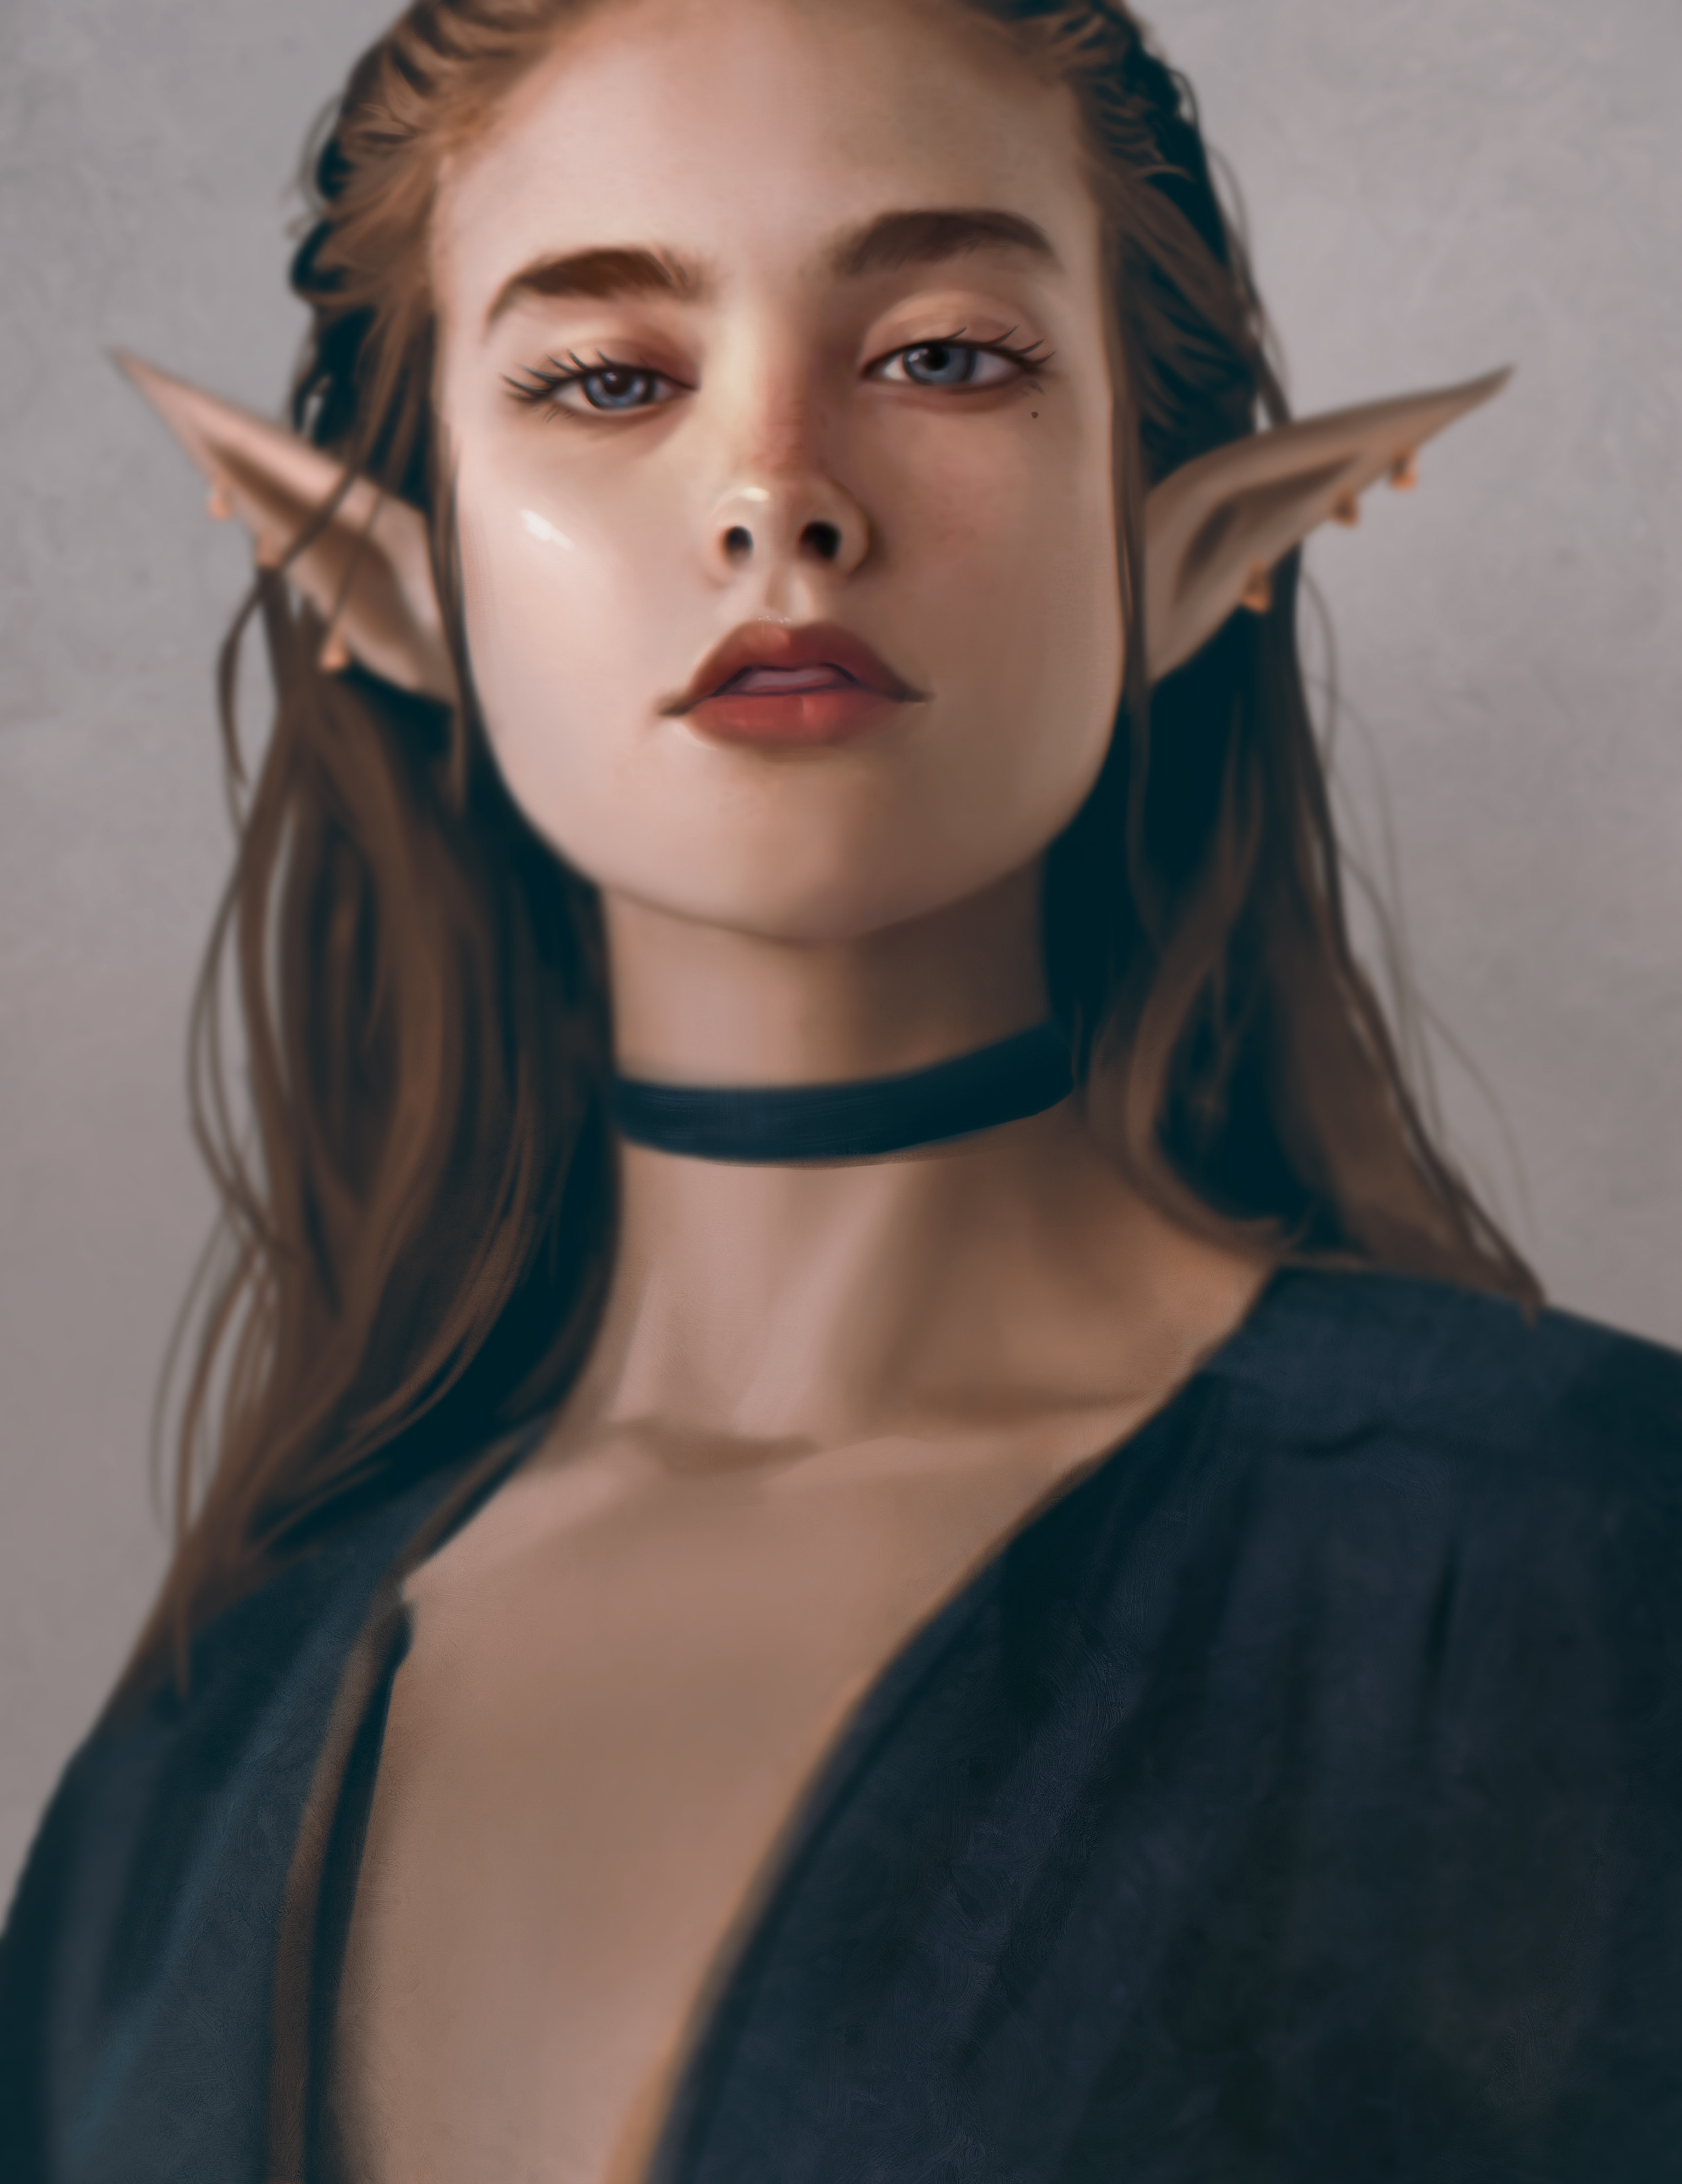 General 2480x3221 Sloth Being (artist) digital art elves fictional character portrait portrait display choker women fantasy art fantasy girl red lipstick pointy ears looking at viewer